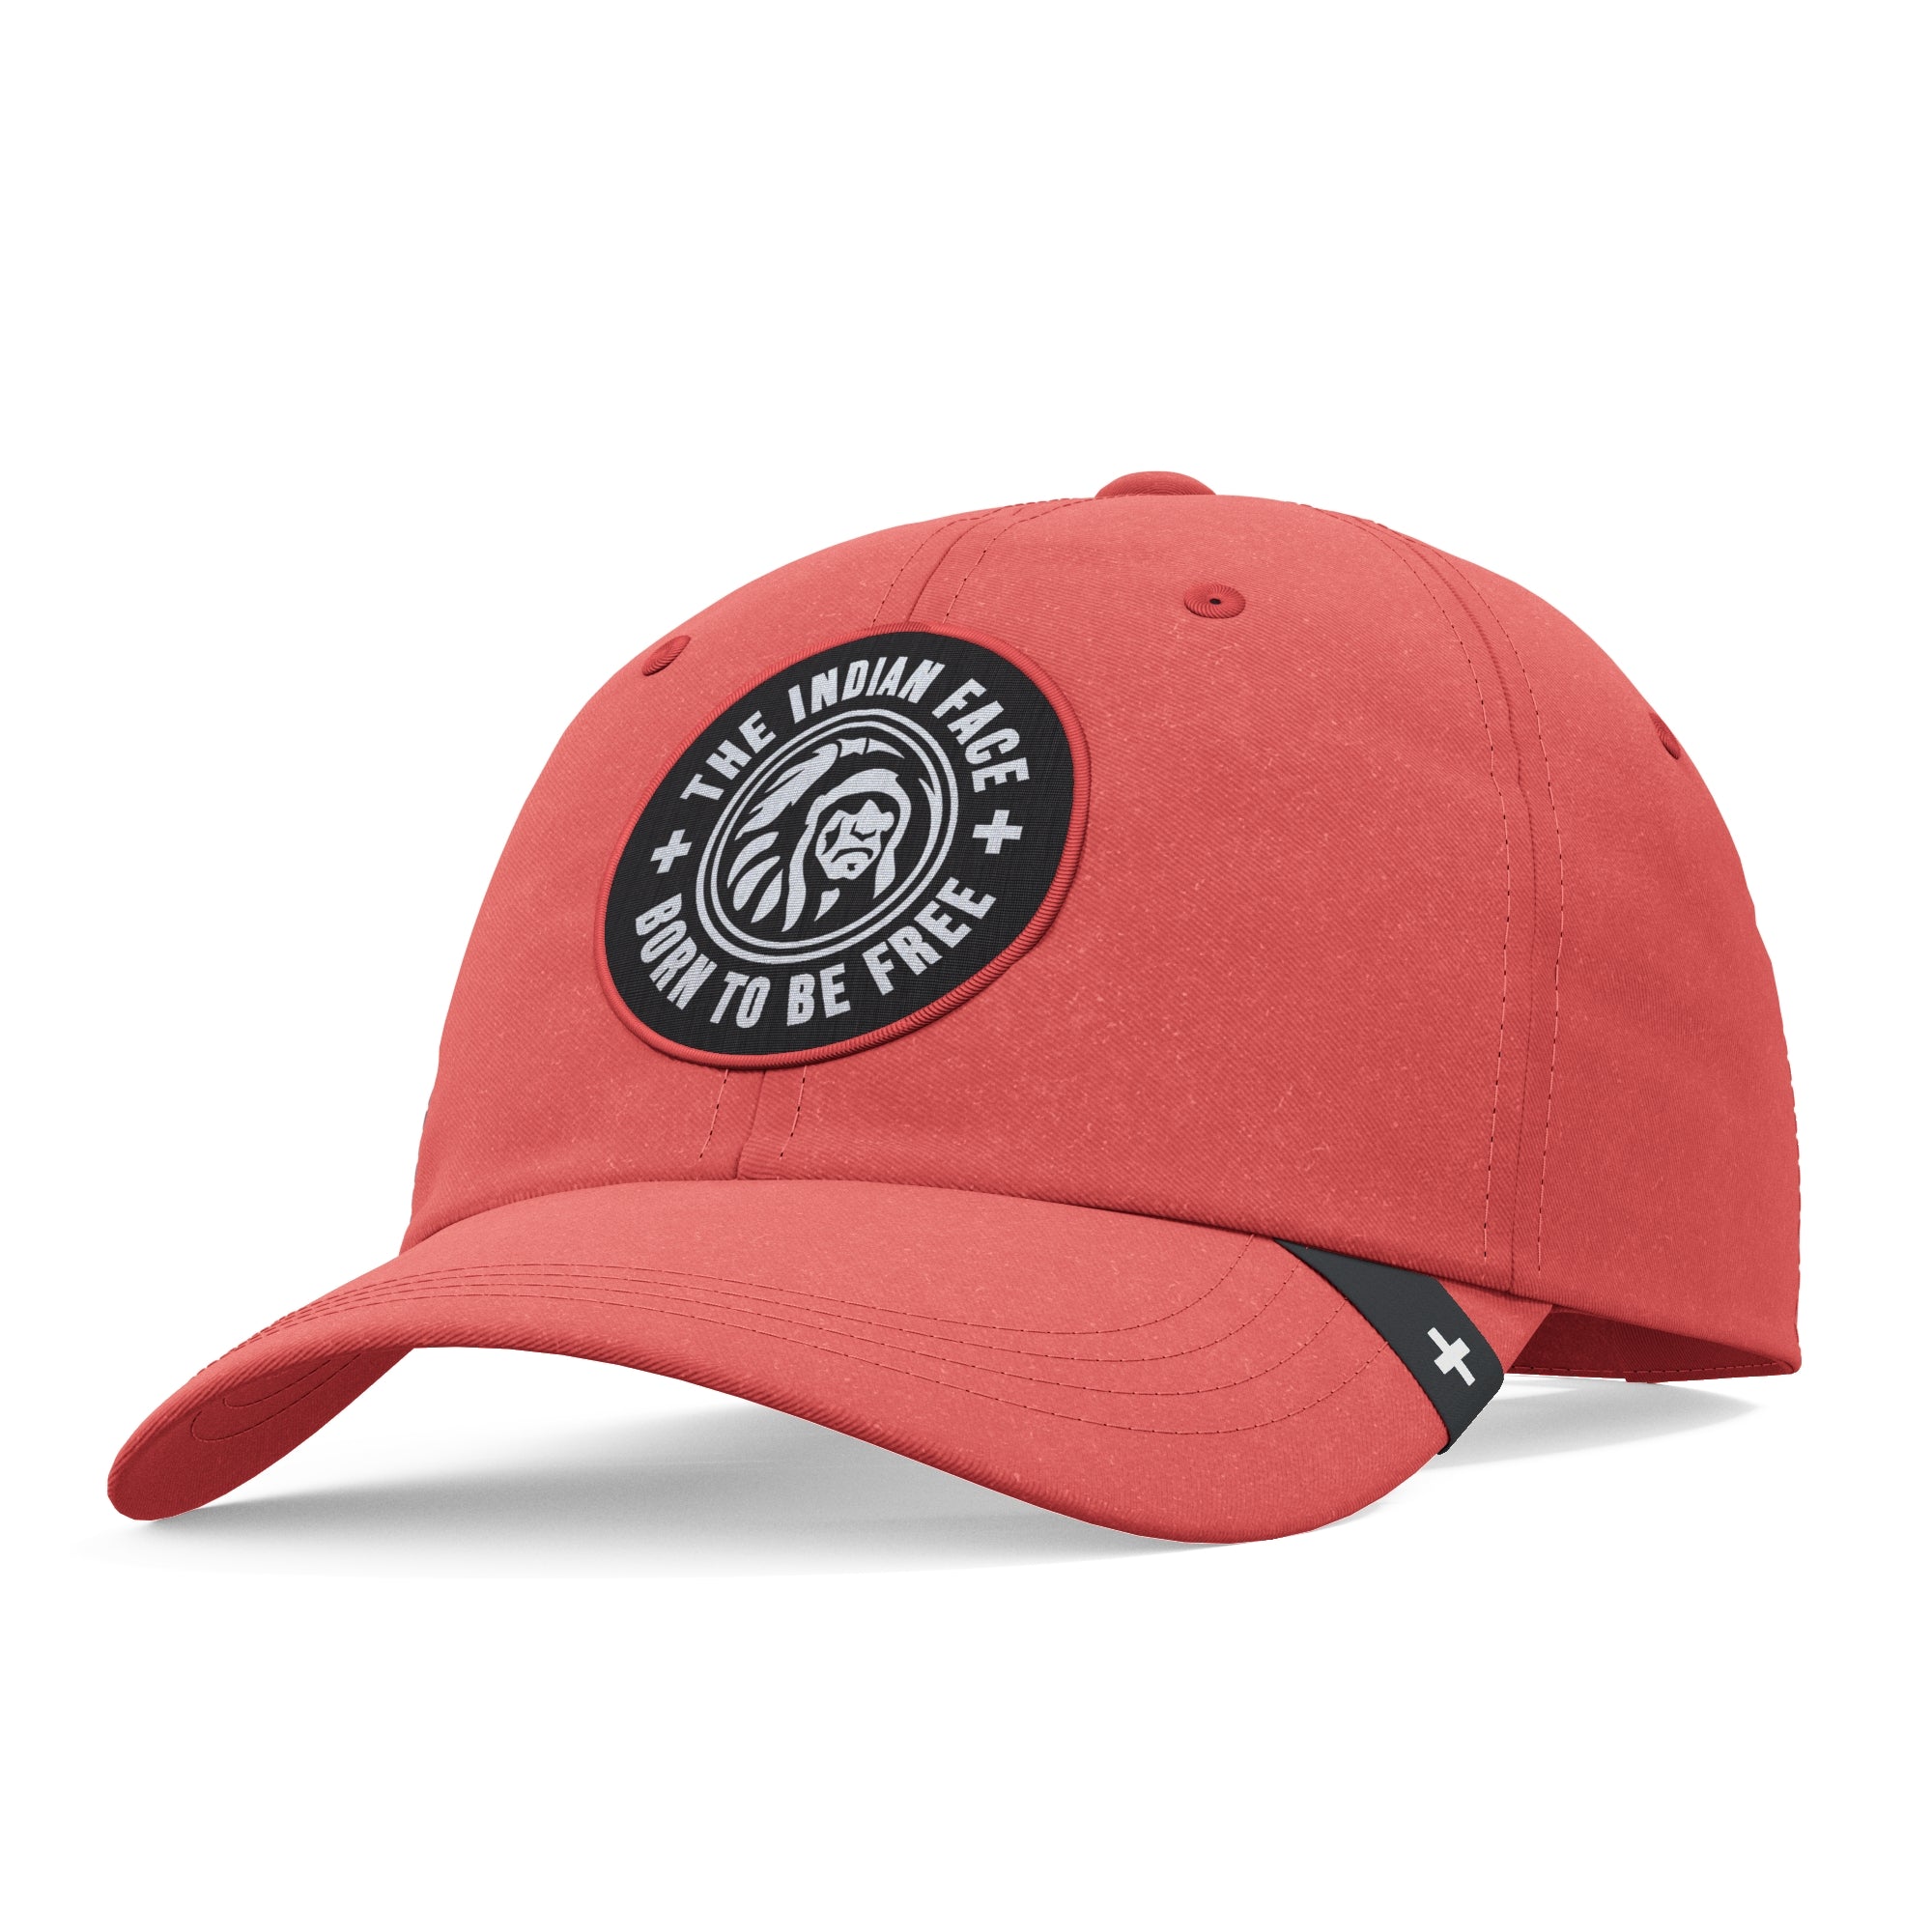 Gorra The Indian Face Nature - rojo - 